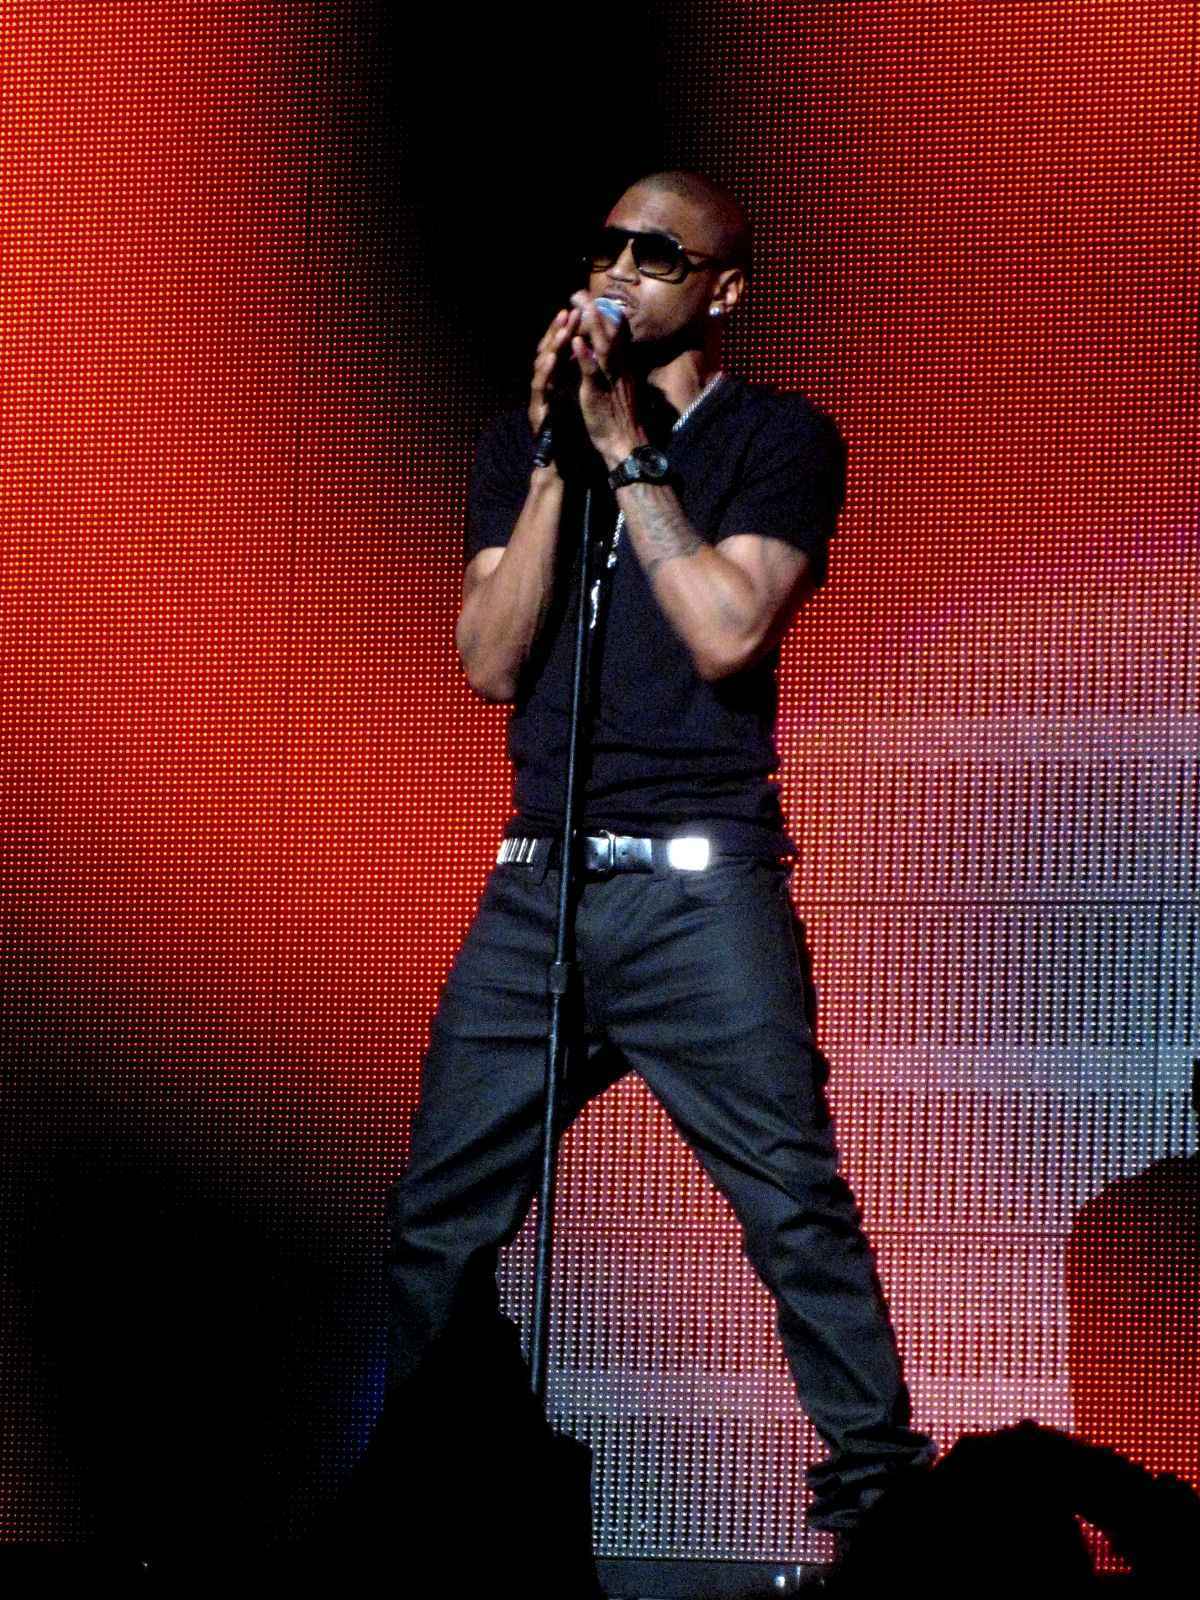 Trey Songz Images on Fanpop.